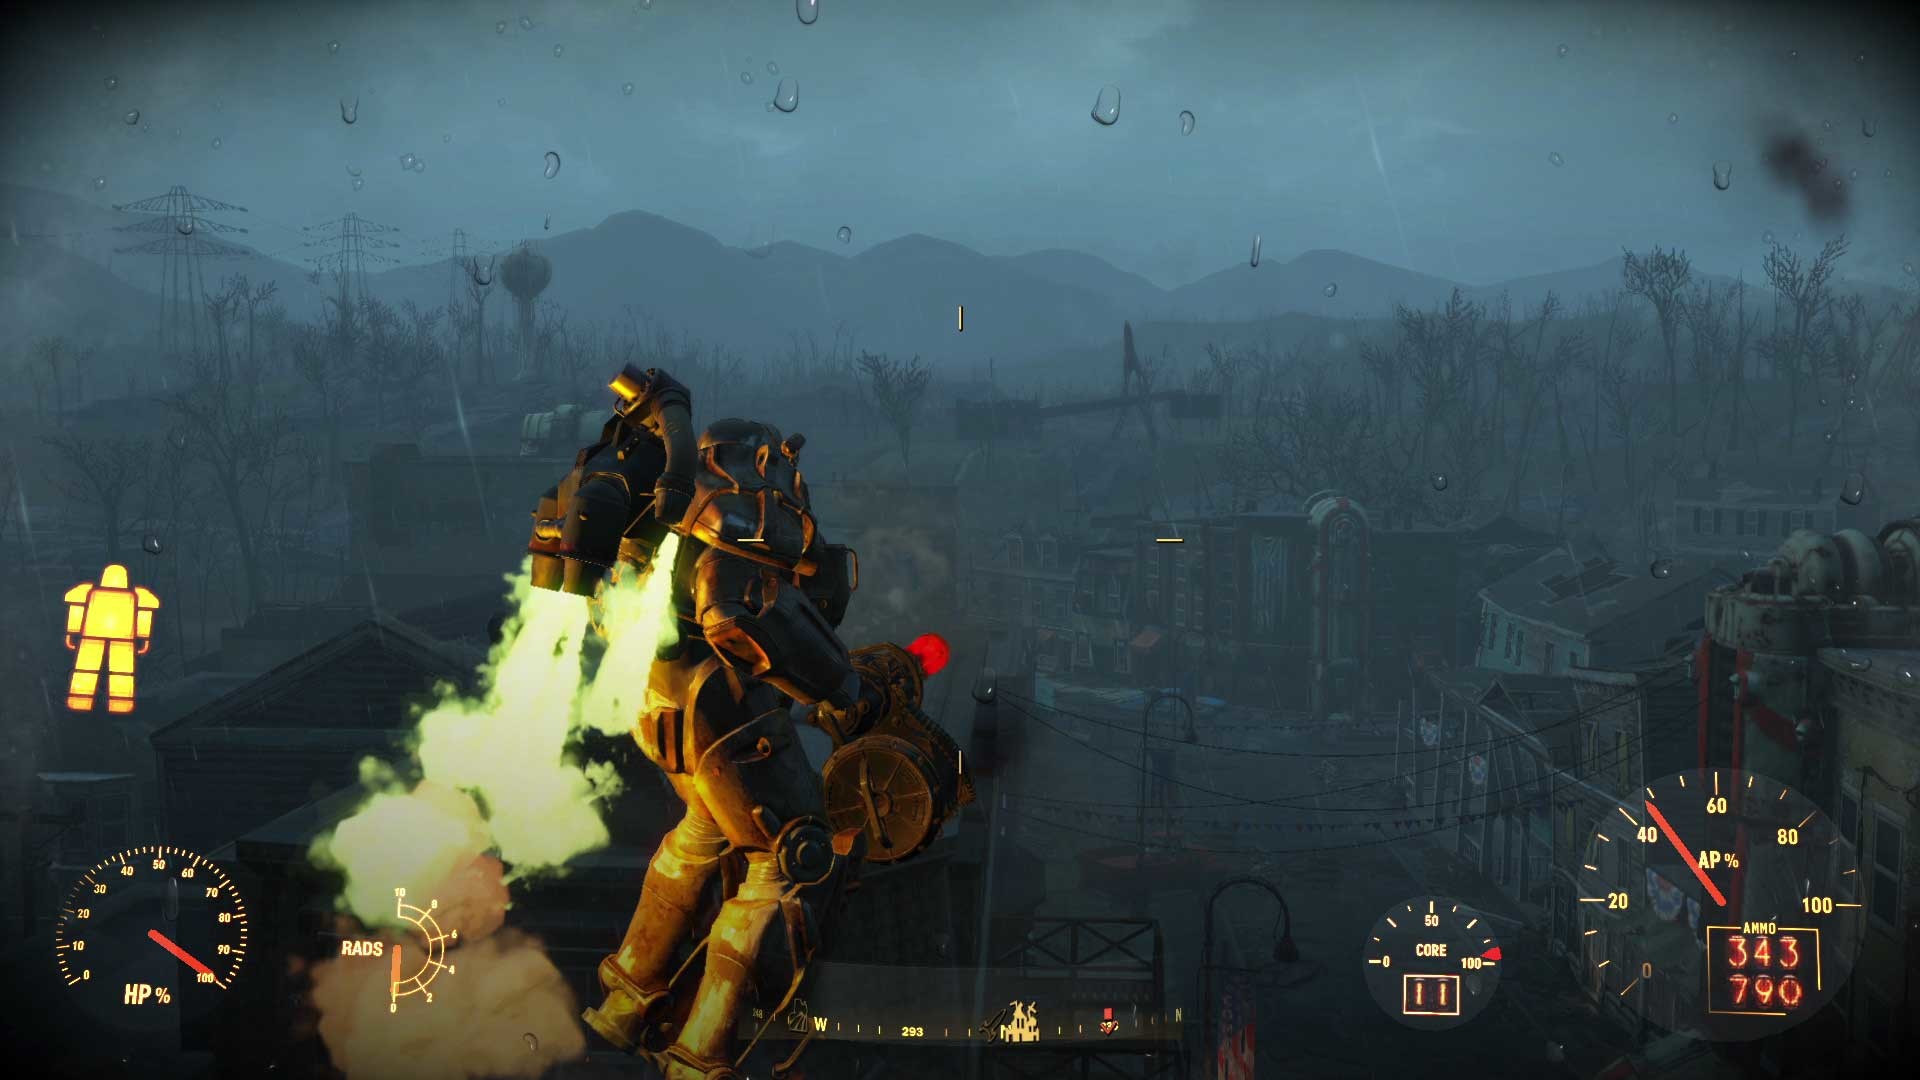 1920x1080 Fallout 4 Gets Glorious New E3 2015 Screenshots And Artwork | VG247